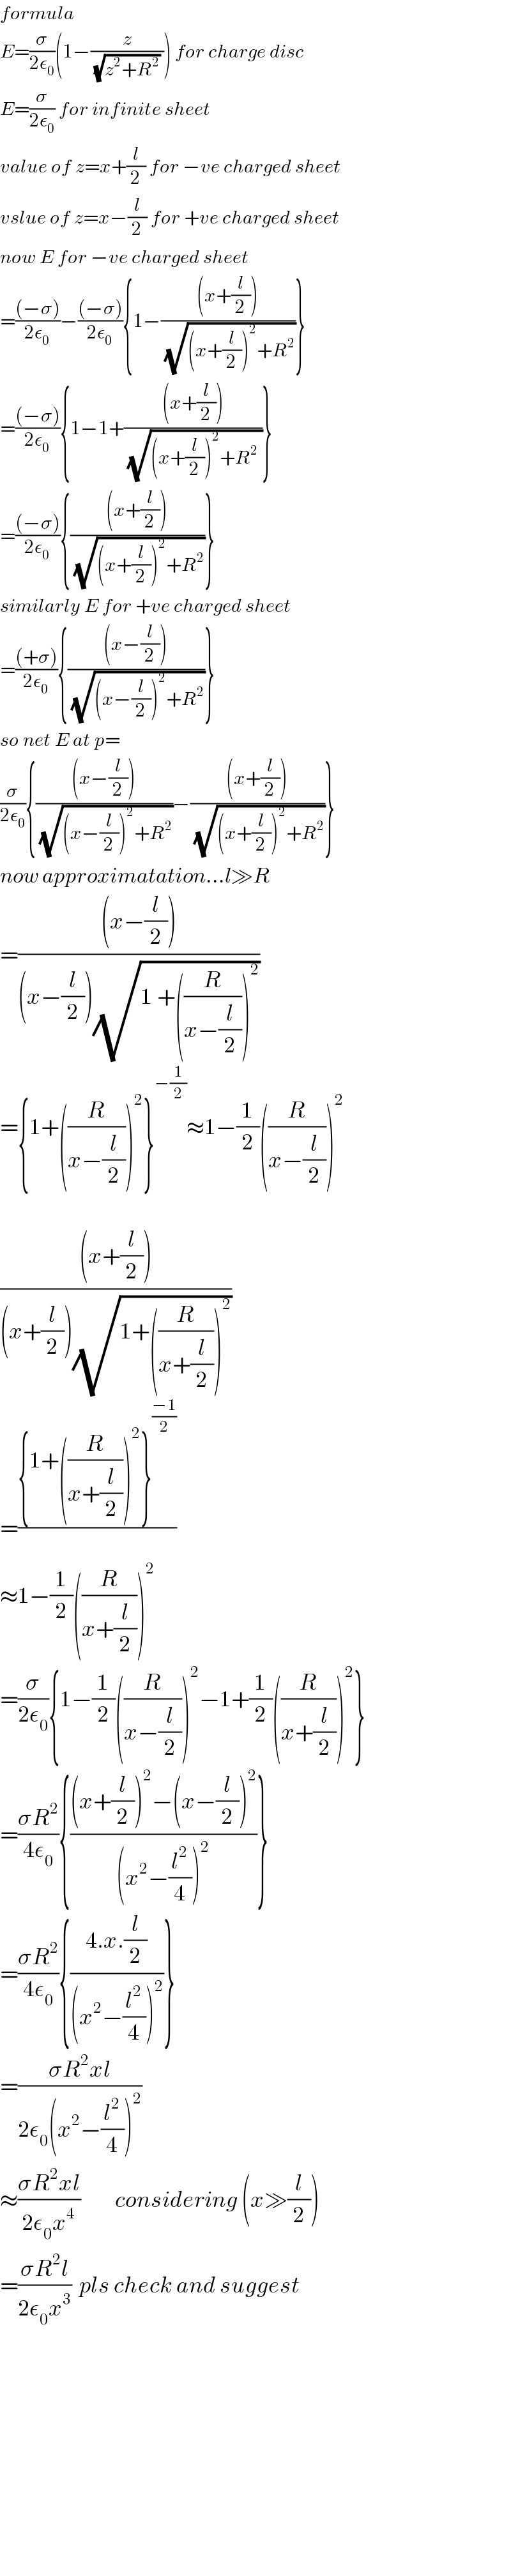 formula  E=(σ/(2ε_0 ))(1−(z/((√(z^2 +R^2 )) ))) for charge disc  E=(σ/(2ε_0 )) for infinite sheet  value of z=x+(l/2) for −ve charged sheet  vslue of z=x−(l/2) for +ve charged sheet  now E for −ve charged sheet  =(((−σ))/(2ε_0 ))−(((−σ))/(2ε_0 )){1−(((x+(l/2)))/(√((x+(l/2))^2 +R^2 )))}  =(((−σ))/(2ε_0 )){1−1+(((x+(l/2)))/(√((x+(l/2))^2 +R^2  )))}  =(((−σ))/(2ε_0 )){(((x+(l/2)))/(√((x+(l/2))^2 +R^2 )))}  similarly E for +ve charged sheet  =(((+σ))/(2ε_0 )){(((x−(l/2)))/(√((x−(l/2))^2 +R^2 )))}  so net E at p=  (σ/(2ε_0 )){(((x−(l/2)))/(√((x−(l/2))^2 +R^2 )))−(((x+(l/2)))/(√((x+(l/2))^2 +R^2 )))}  now approximatation...l≫R  =(((x−(l/2)))/((x−(l/2))(√(1_ +((R/(x−(l/2))))^2 ))))  ={1+((R/(x−(l/2))))^2 }^(−(1/2)) ≈1−(1/2)((R/(x−(l/2))))^2     (((x+(l/2)))/((x+(l/2))(√(1+((R/(x+(l/2))))^2 ))))   =(({1+((R/(x+(l/2))))^2 }^((−1)/2) )/)  ≈1−(1/2)((R/(x+(l/2))))^2   =(σ/(2ε_0 )){1−(1/2)((R/(x−(l/2))))^2 −1+(1/2)((R/(x+(l/2))))^2 }  =((σR^2 )/(4ε_0 )){(((x+(l/2))^2 −(x−(l/2))^2 )/((x^2 −(l^2 /4))^2 ))}  =((σR^2 )/(4ε_0 )){((4.x.(l/2))/((x^2 −(l^2 /4))^2 ))}  =((σR^2 xl)/(2ε_0 (x^2 −(l^2 /4))^2 ))  ≈((σR^2 xl)/(2ε_0 x^4 ))         considering (x≫(l/2))  =((σR^2 l)/(2ε_0 x^3 ))  pls check and suggest                